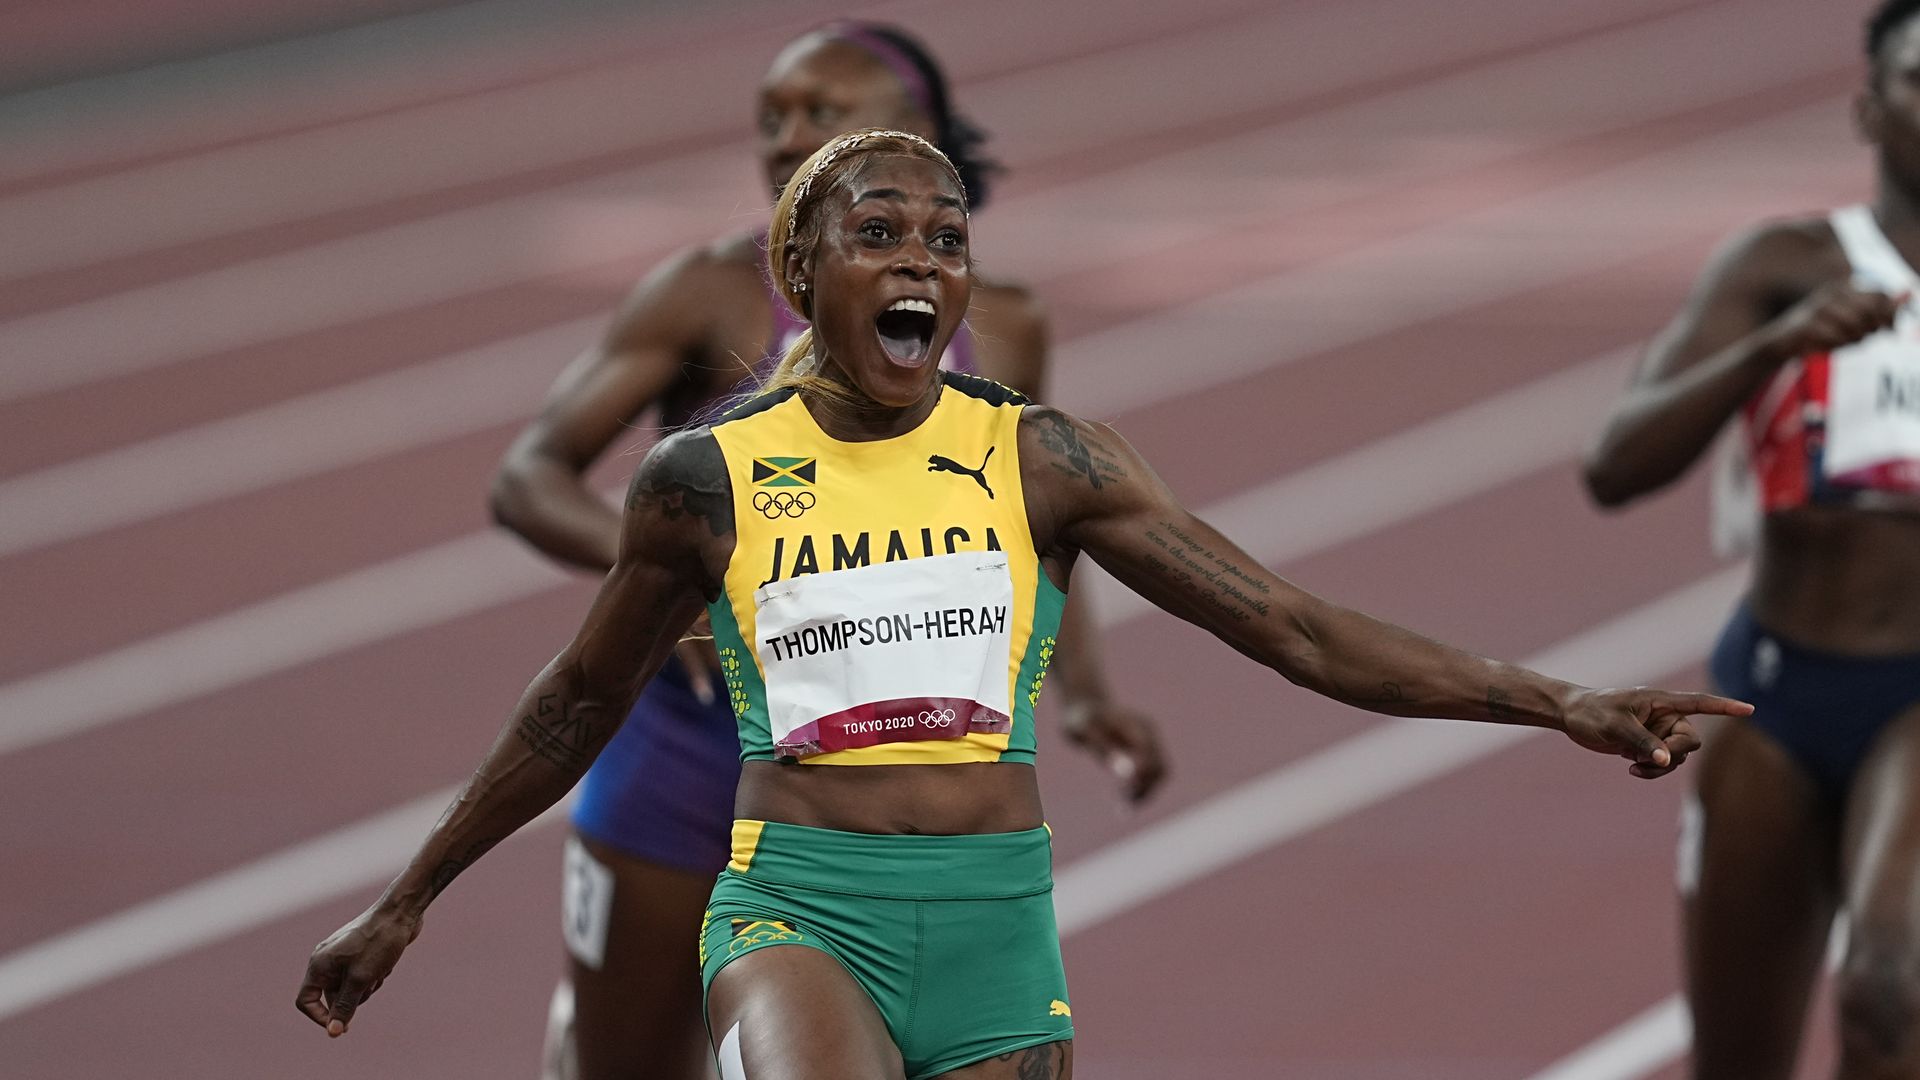 Elaine Thompson-Herah wins the gold in 100 meter for women in 9.61 , Olympic record, at the Tokyo Olympics,